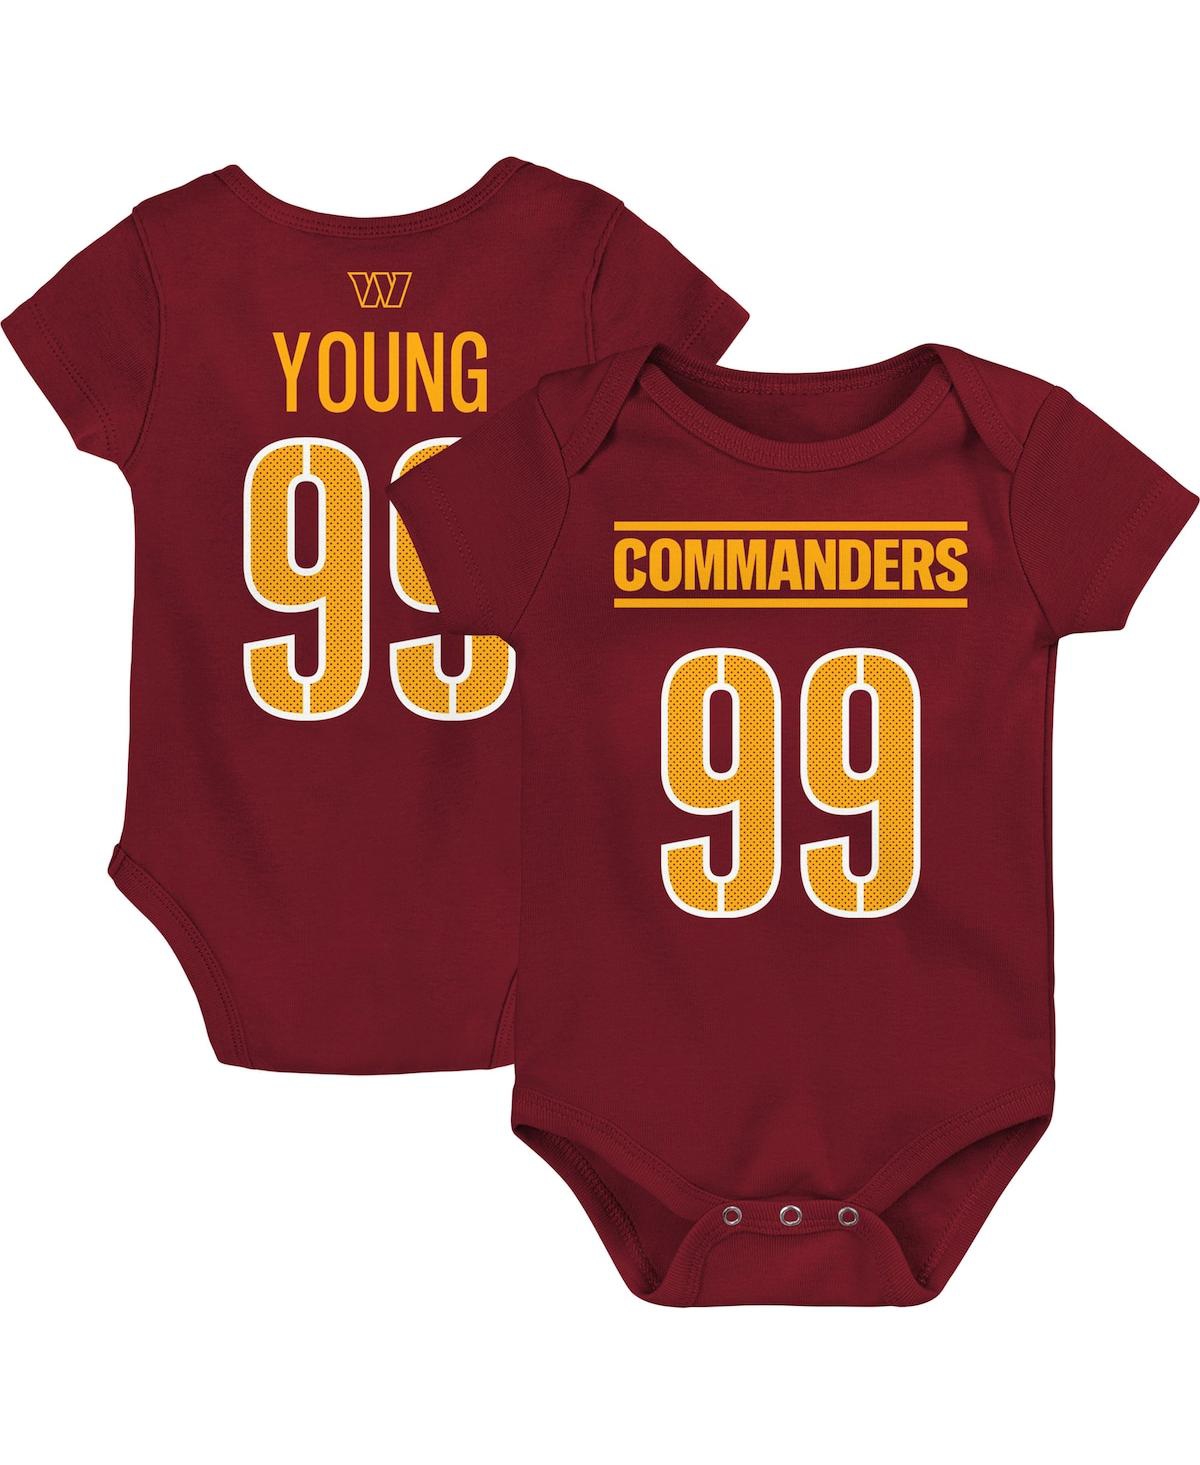 OUTERSTUFF NEWBORN AND INFANT BOYS AND GIRLS CHASE YOUNG BURGUNDY WASHINGTON COMMANDERS MAINLINER PLAYER NAME A